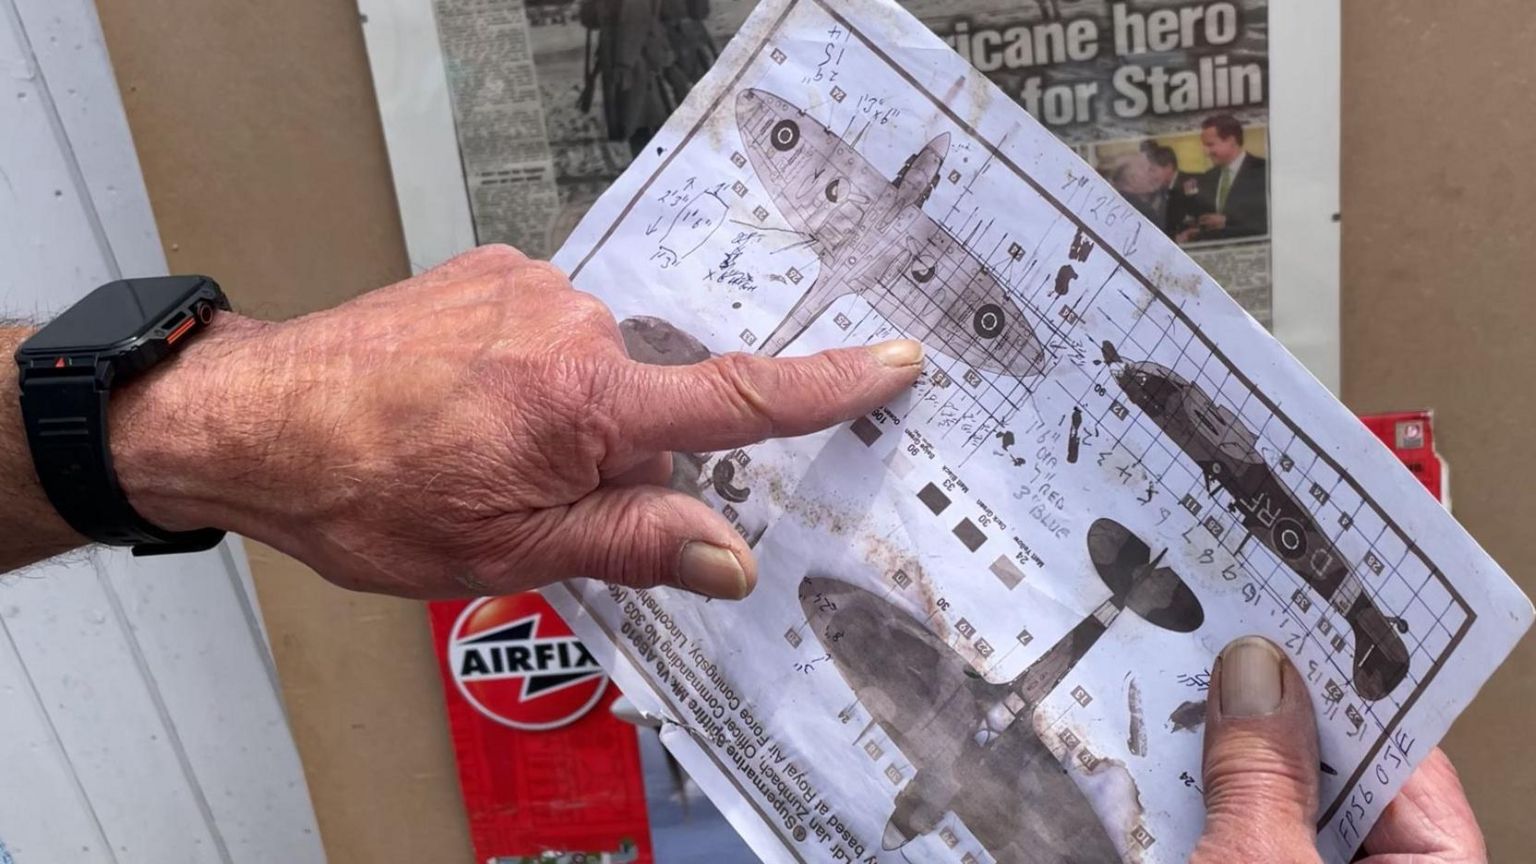 The instructions from a model plane kit, Mr Scott used to build the replica